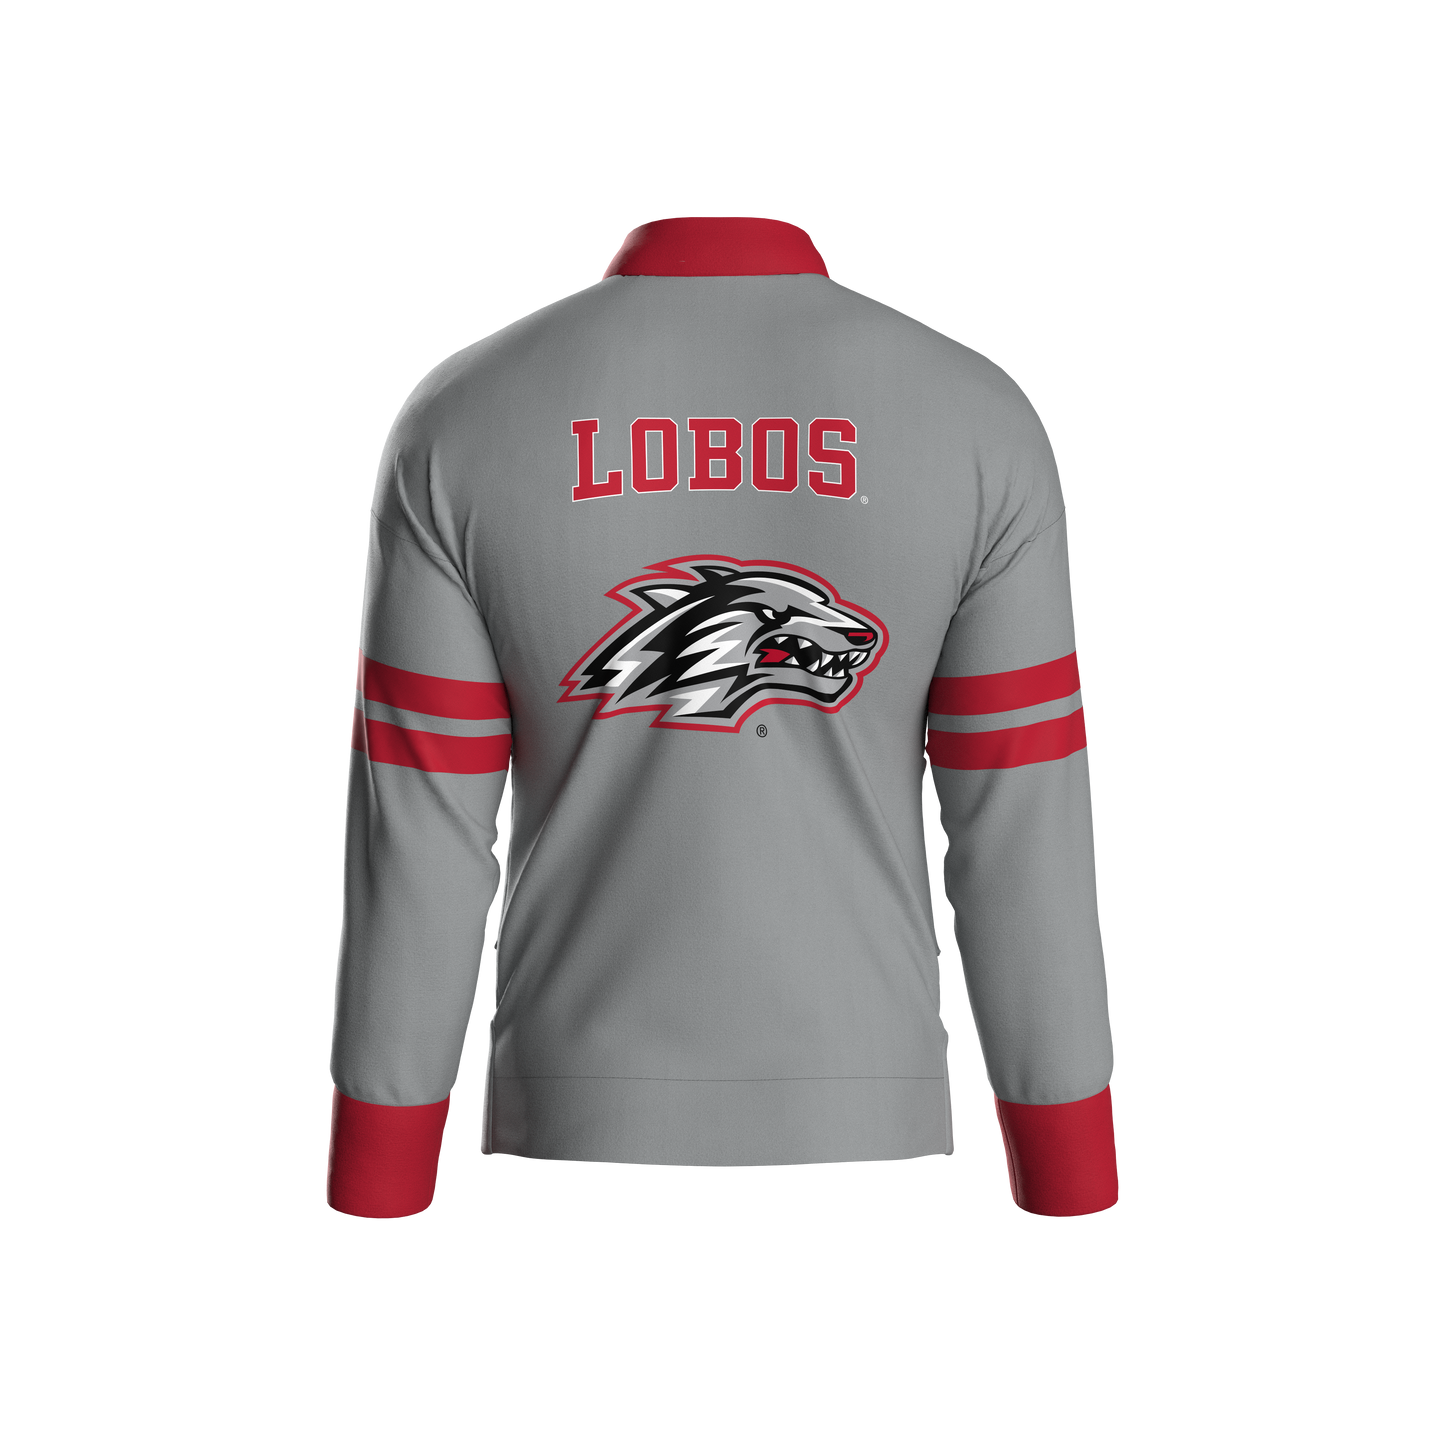 University of New Mexico Away Zip-Up (youth)